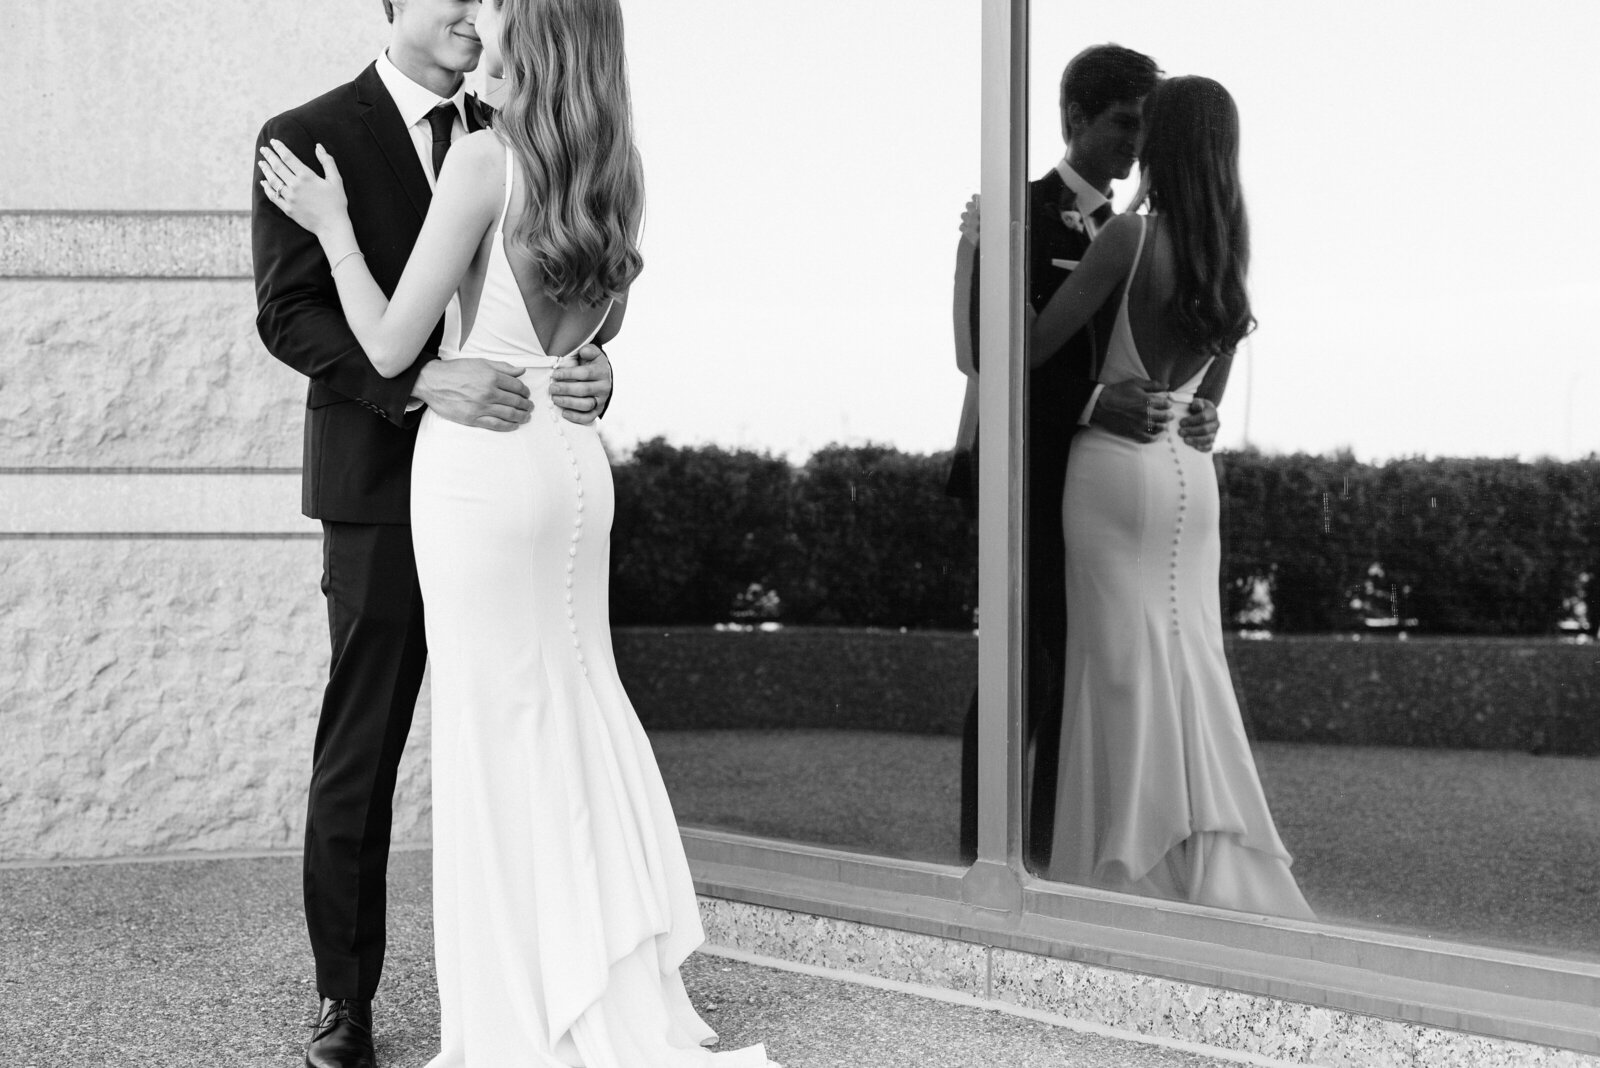 Wedding couple standing in front of a large window with reflection